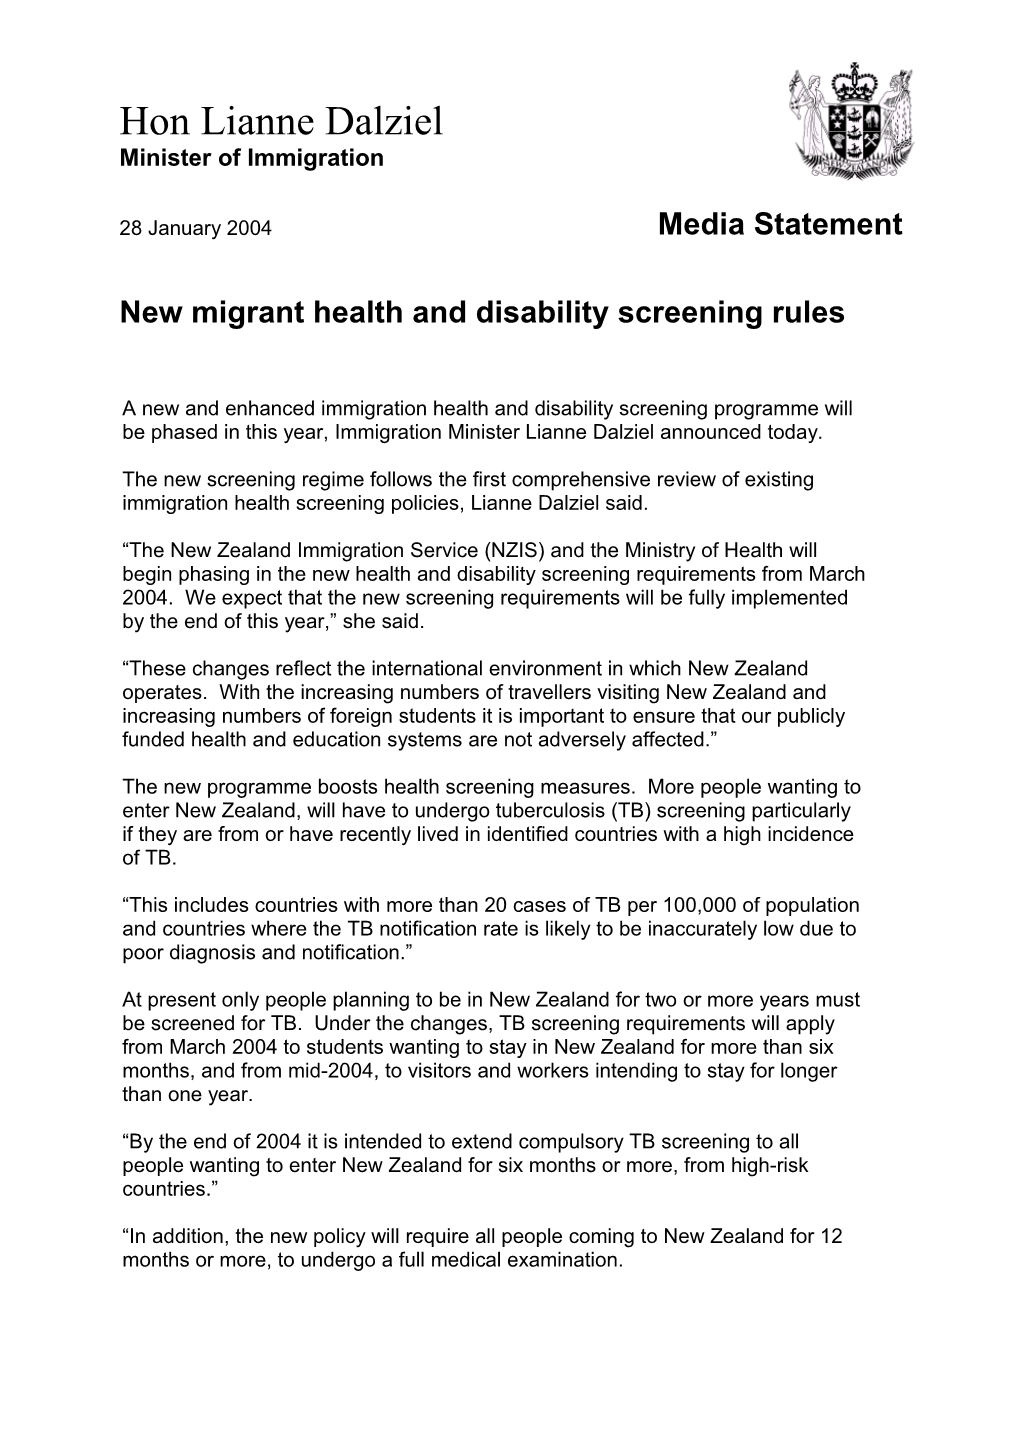 New Migrant Health and Disability Screening Rules